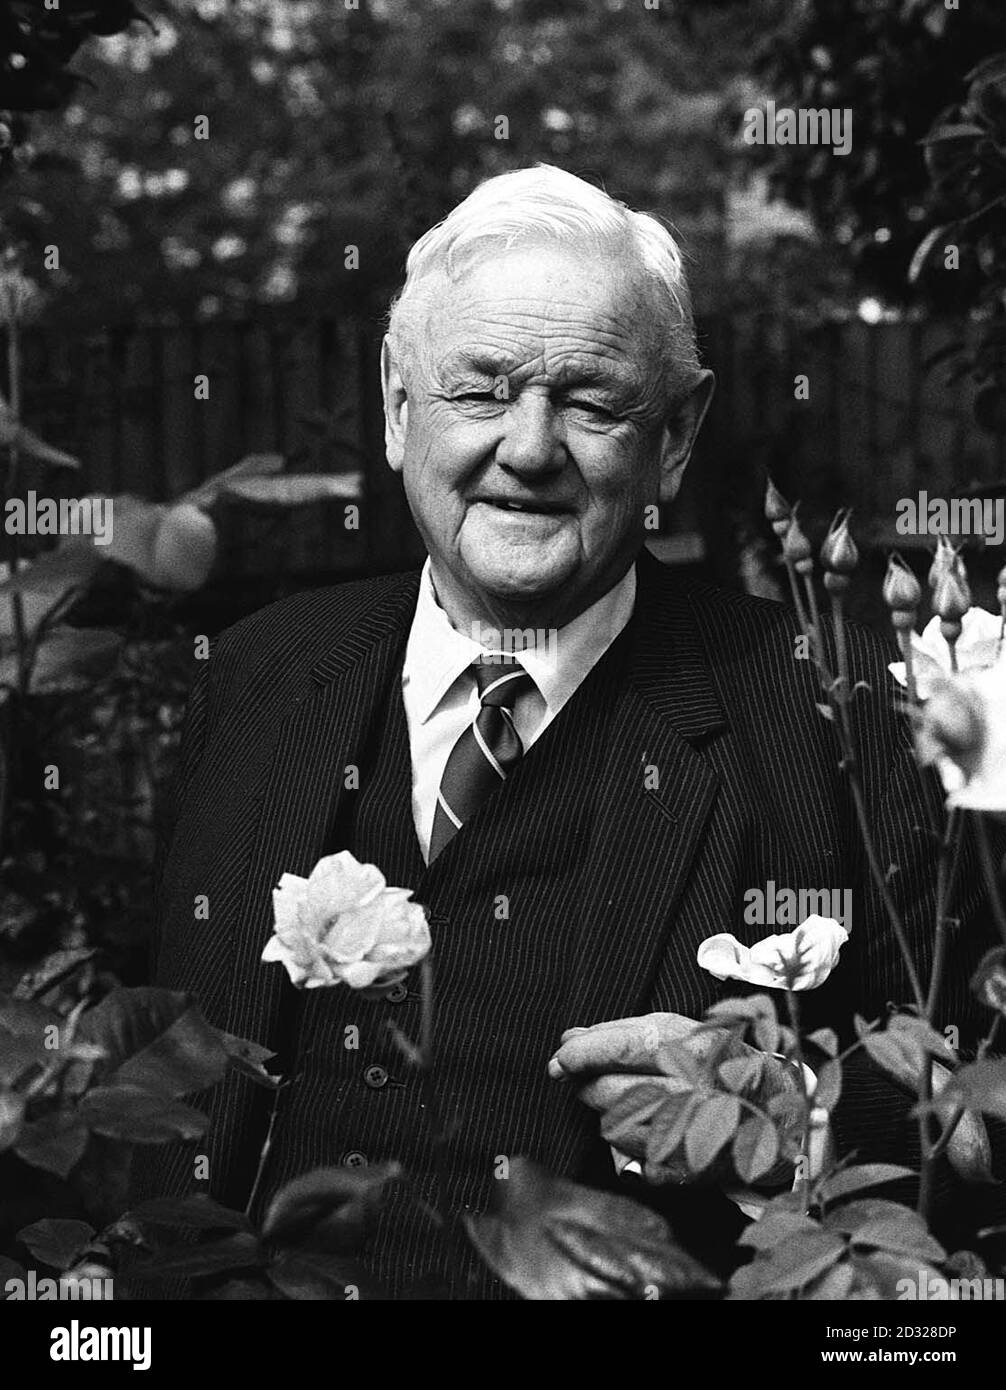 Lord Hailsham of St Marylbone, in the garden of his south London home. He stepped down as Lord Chancellor last month at the age of 79.   * 14/10/01 Former Lord Chancellor Lord Hailsham of St Marylebone has died after a long illness, aged 94 it was announced. The Tory peer's son Douglas Hogg said his father died at his London home on Friday.  Stock Photo